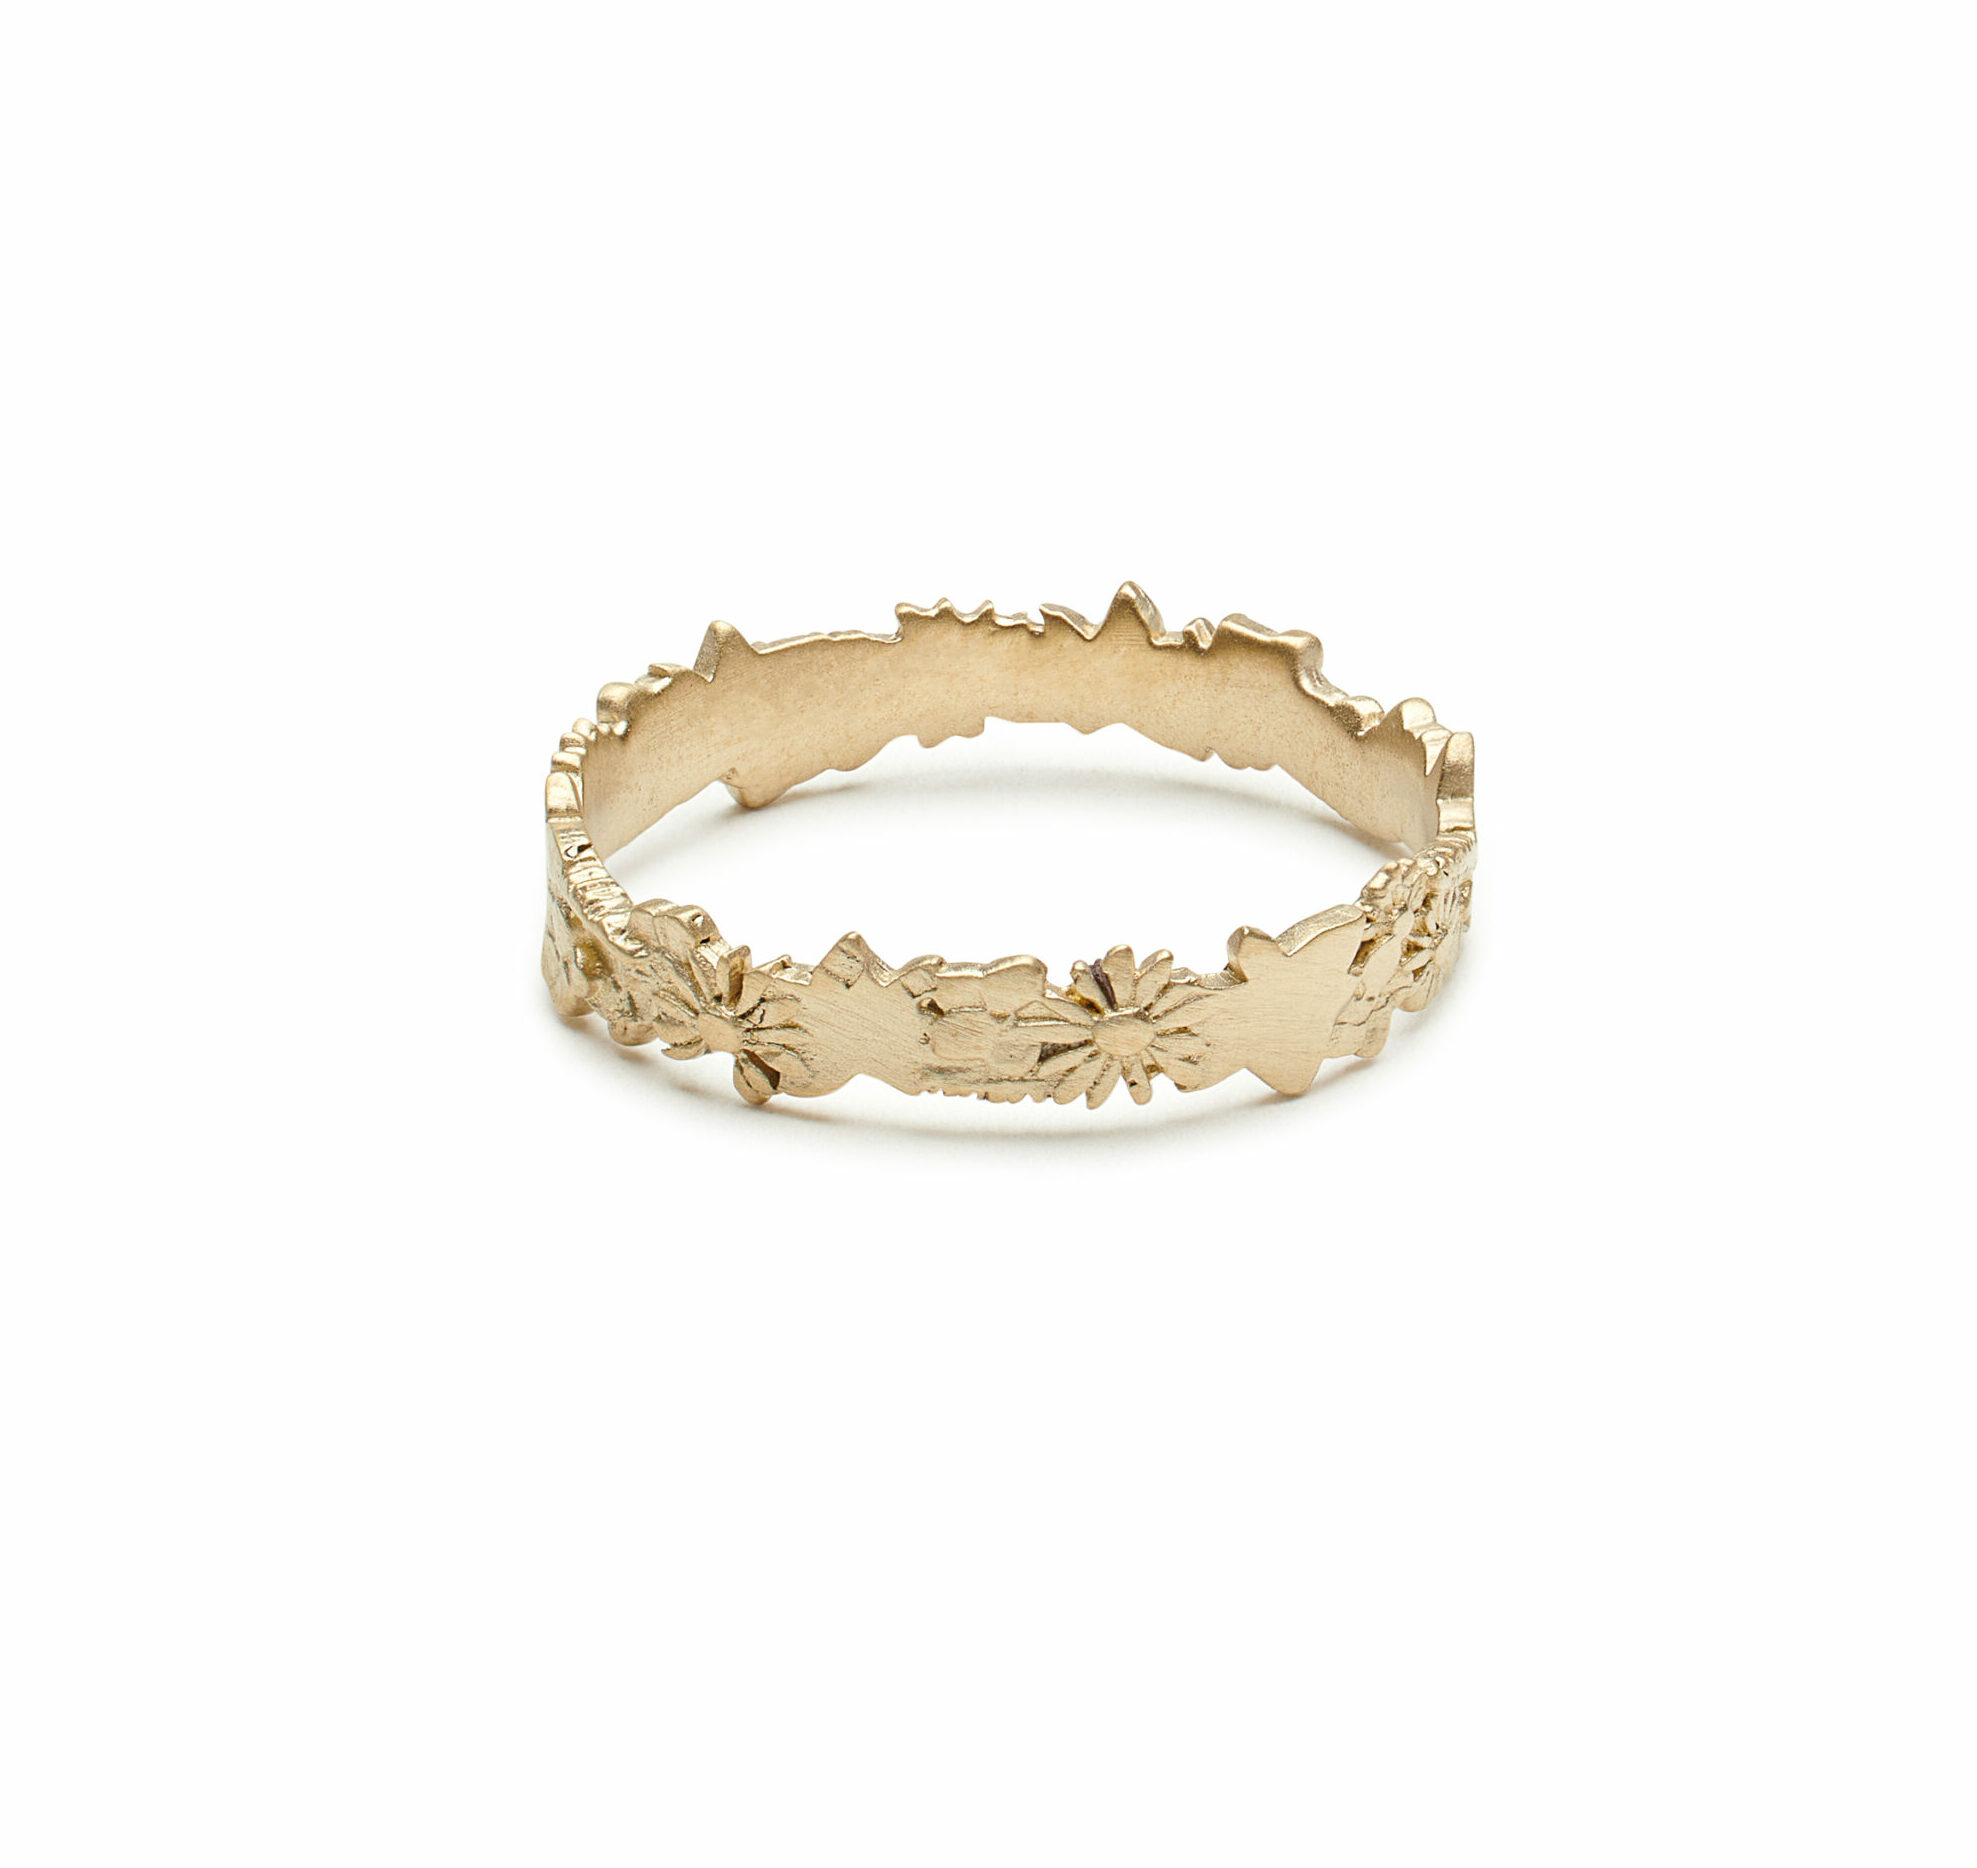 Gold ring made up of wildflower silhouettes